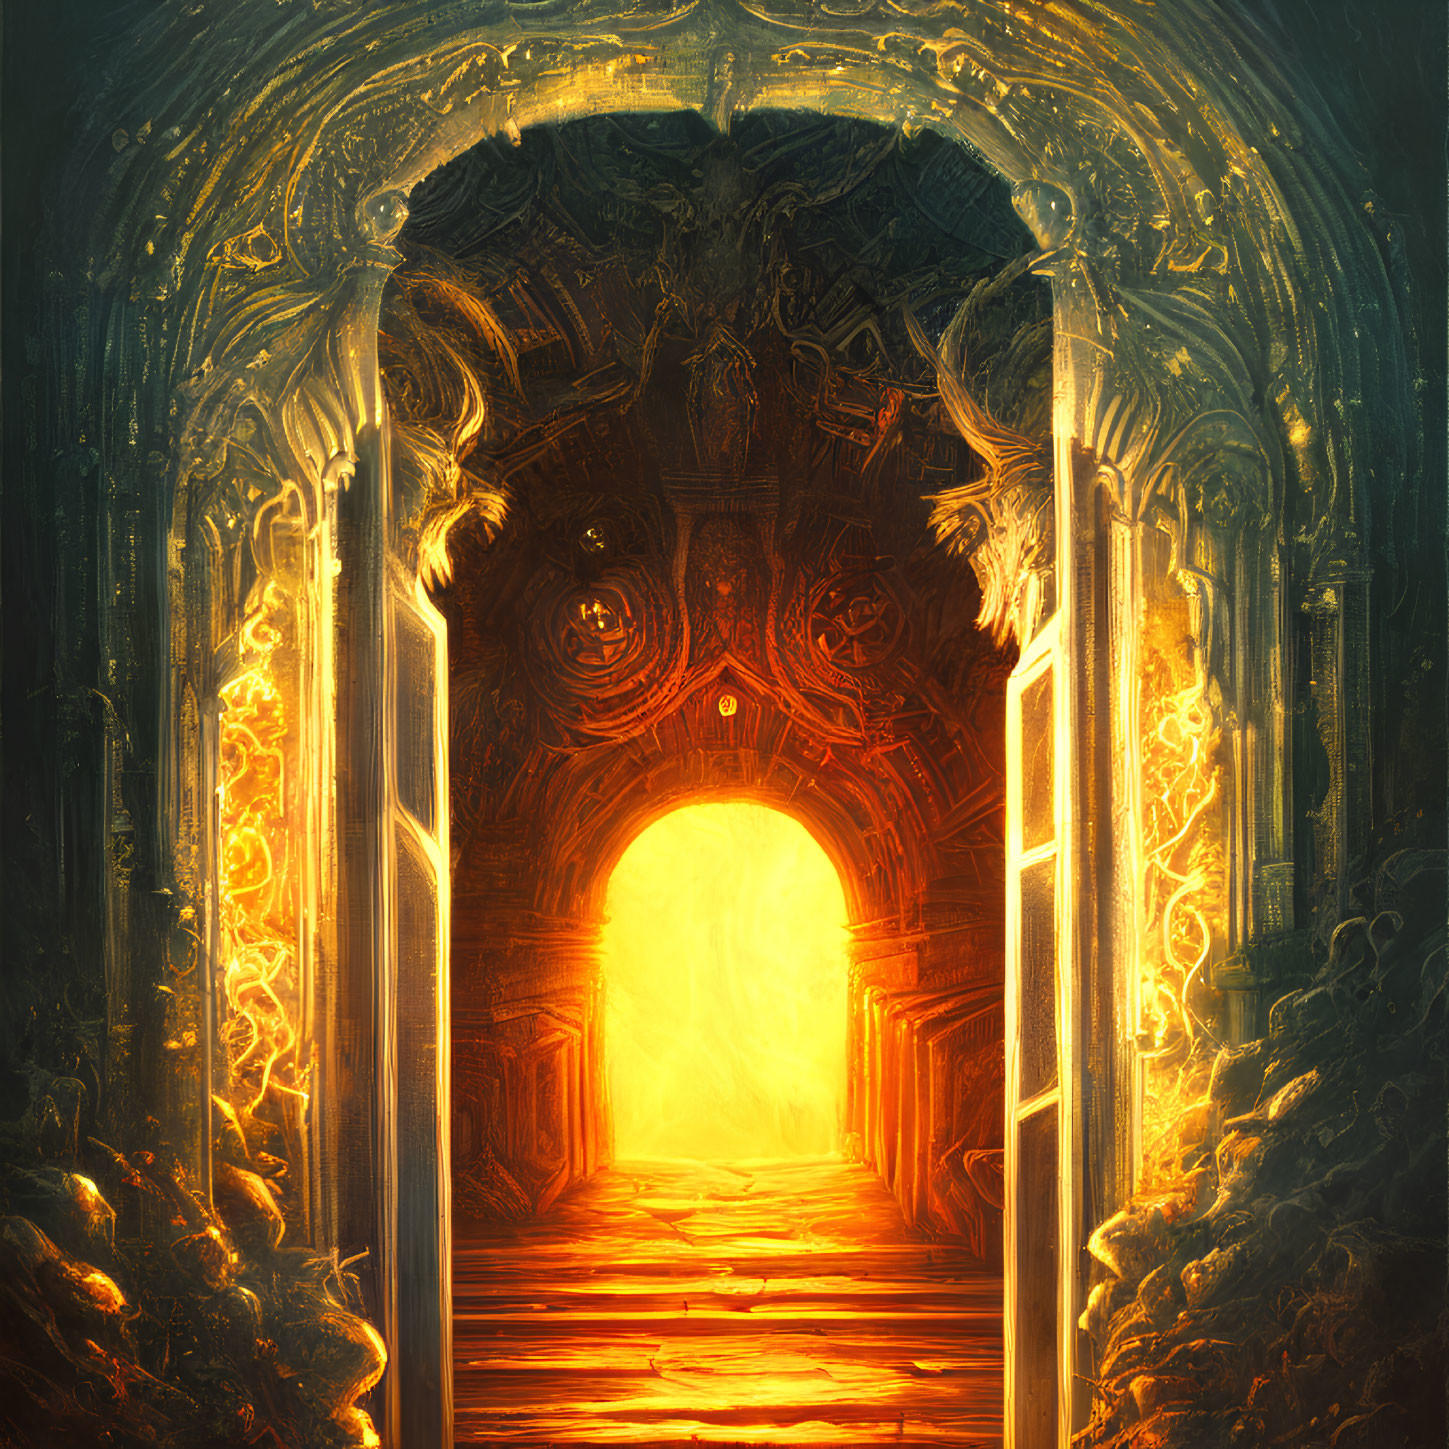 Intricate Golden Fantasy Doorway with Mysterious Carvings